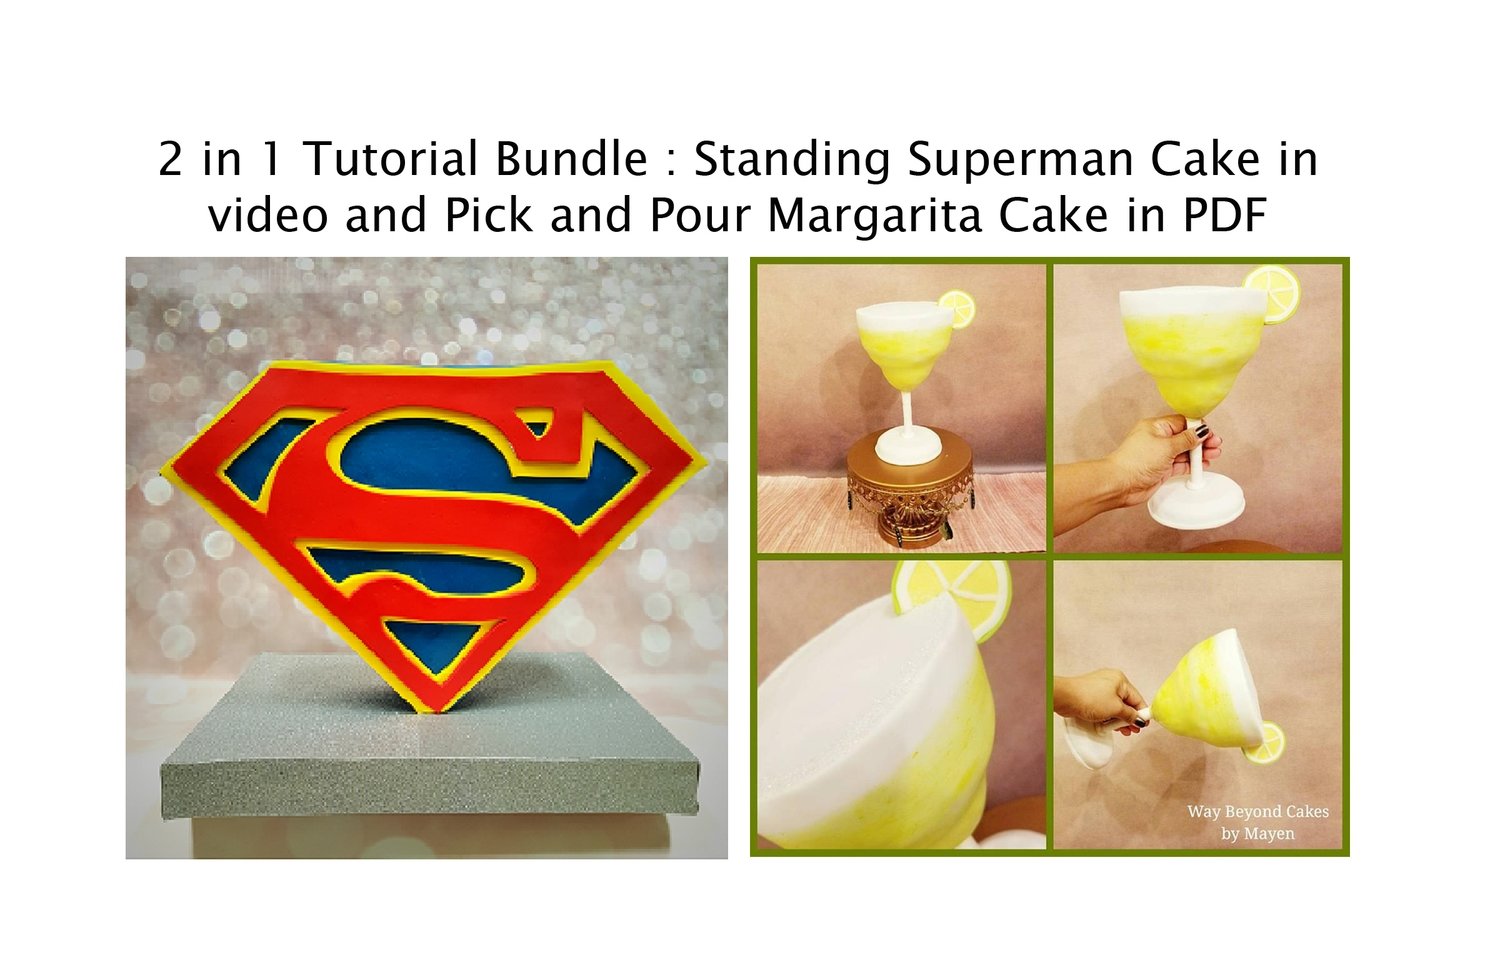 Tutorial Bundle : Standing Super Cake and Pick and Pour Margarita Cake $17